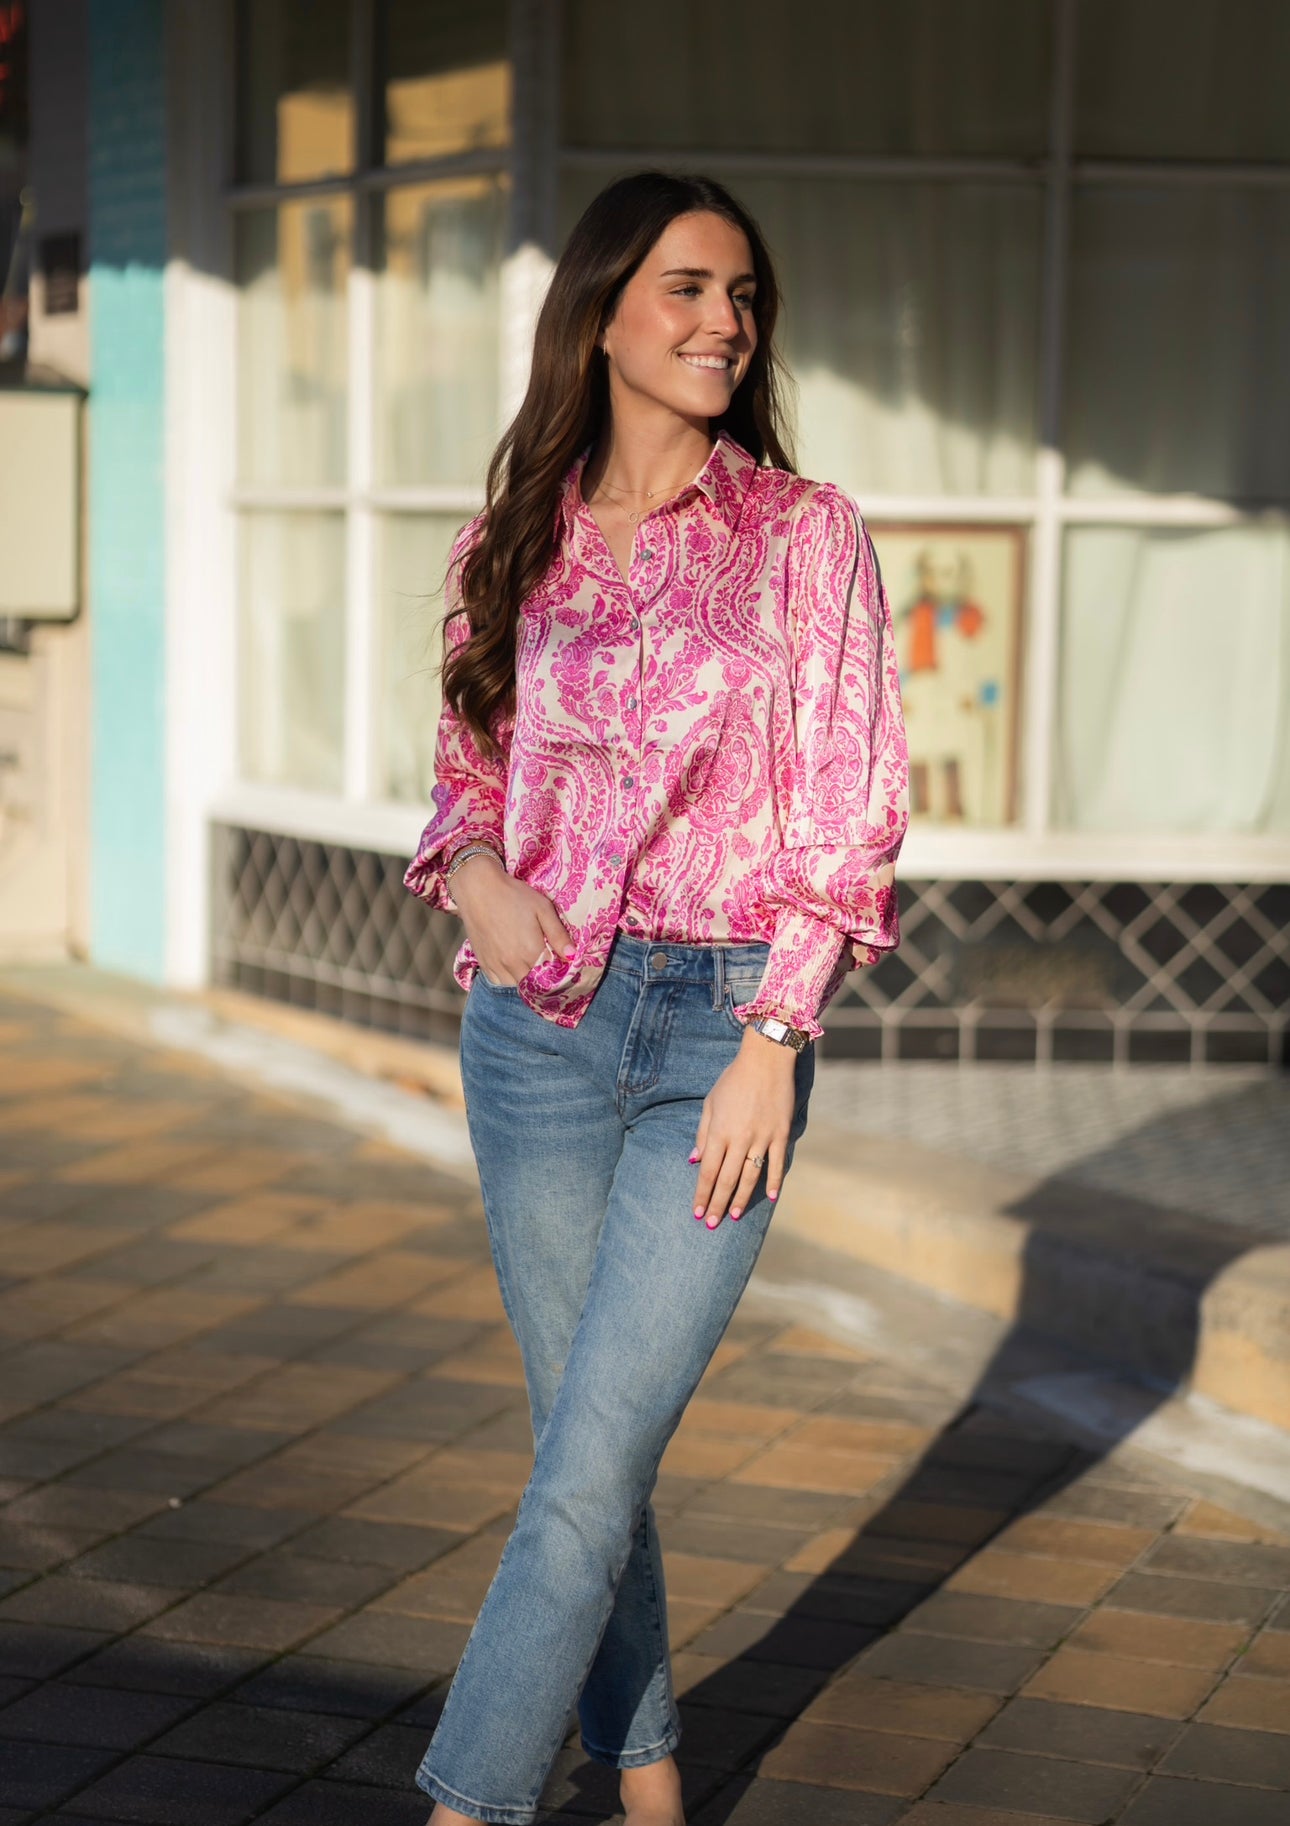 The Paisley Pink Blouse